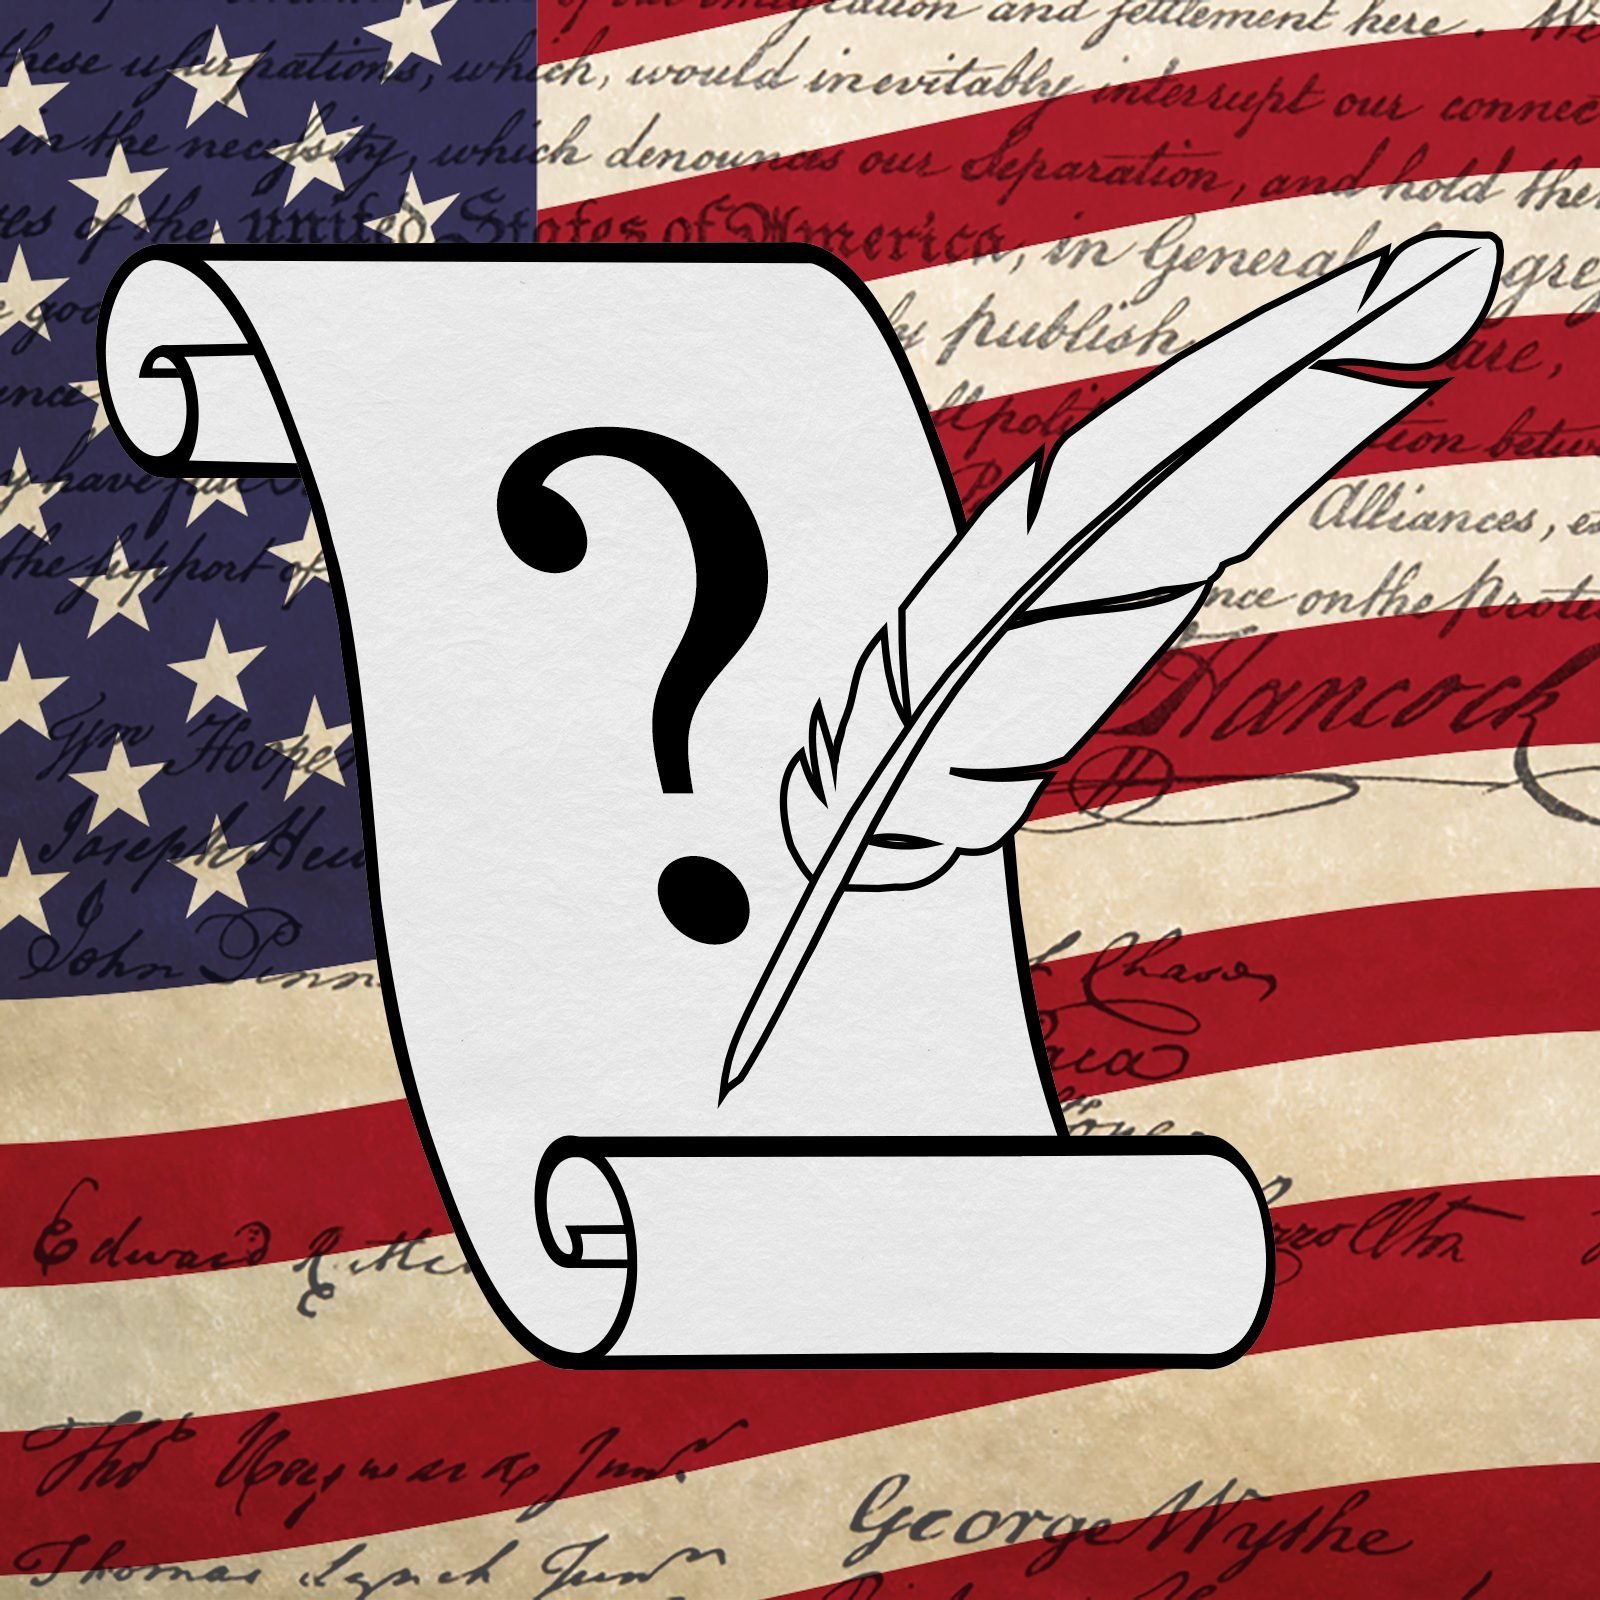 How Many Signatures Are on the Declaration of Independence?